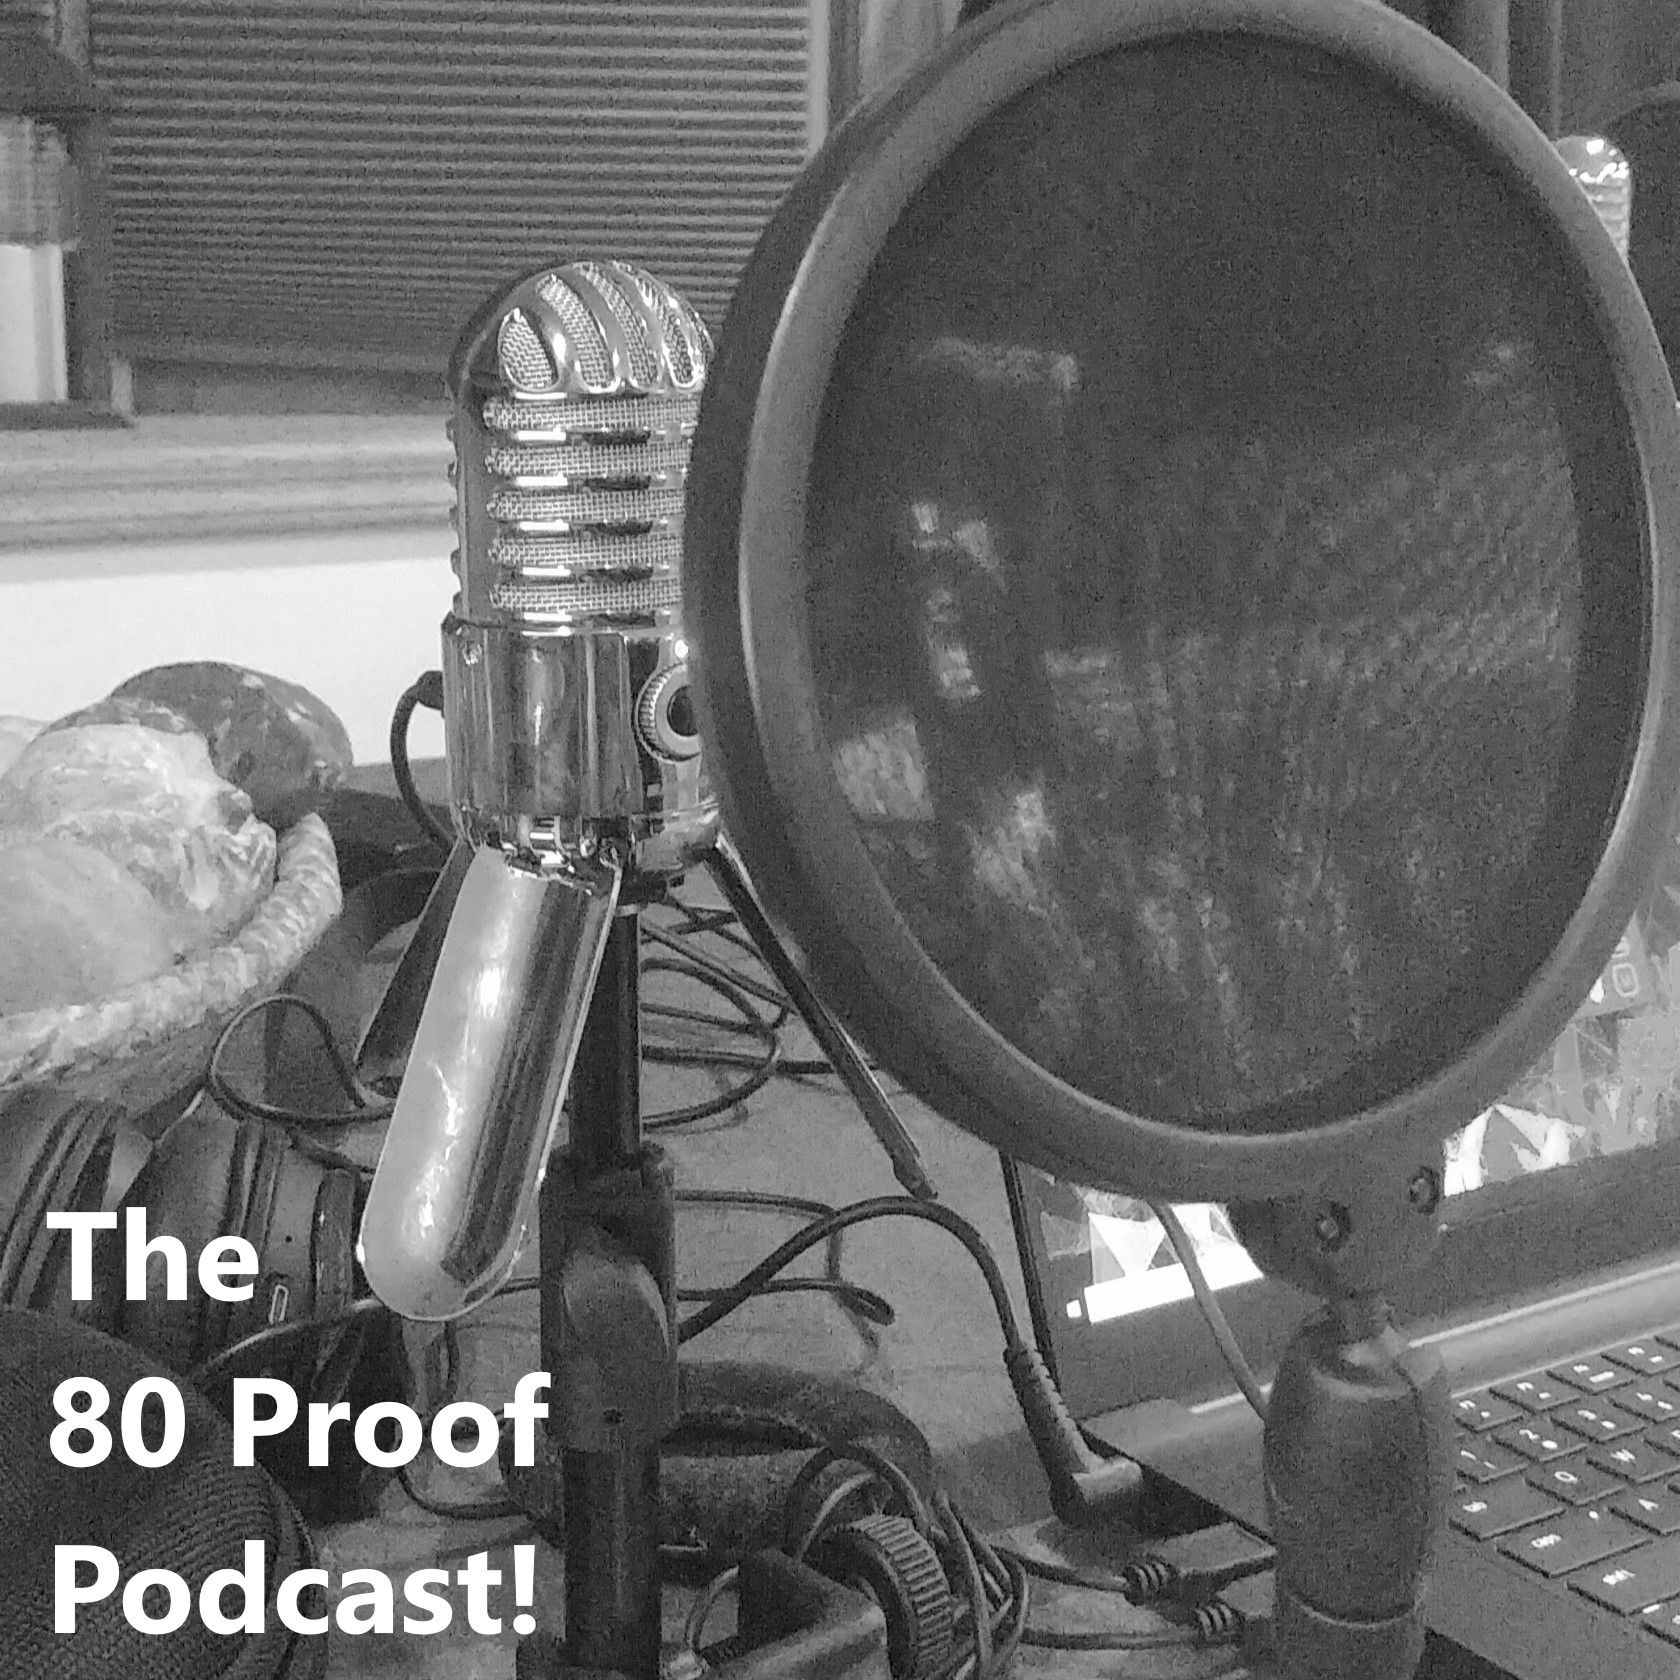 The 80 Proof Podcast!